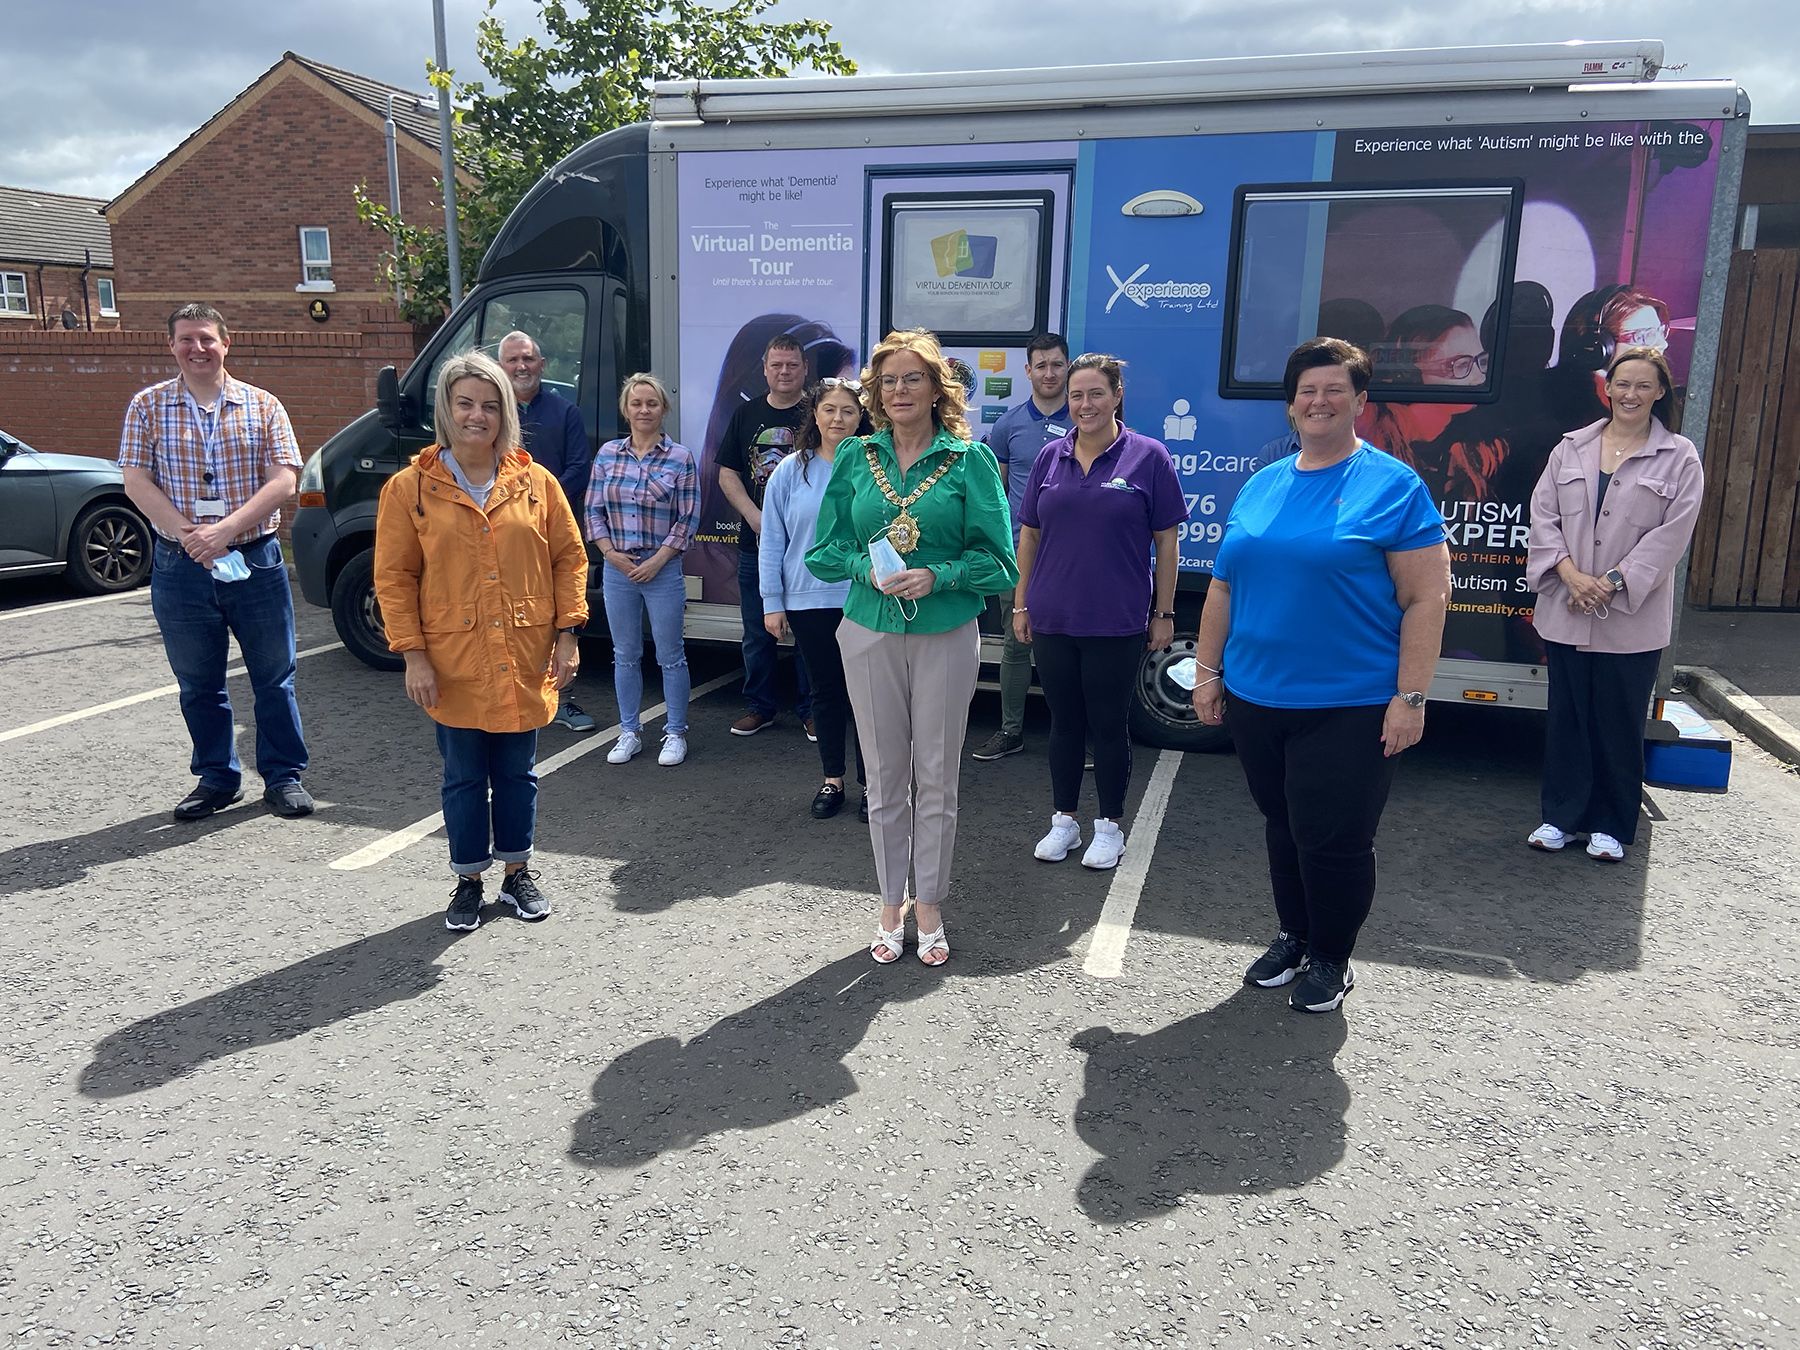 TOGETHER: Lord Mayor Cllr Tina Black launched the virtual dementia bus at Cullingtree Meadows